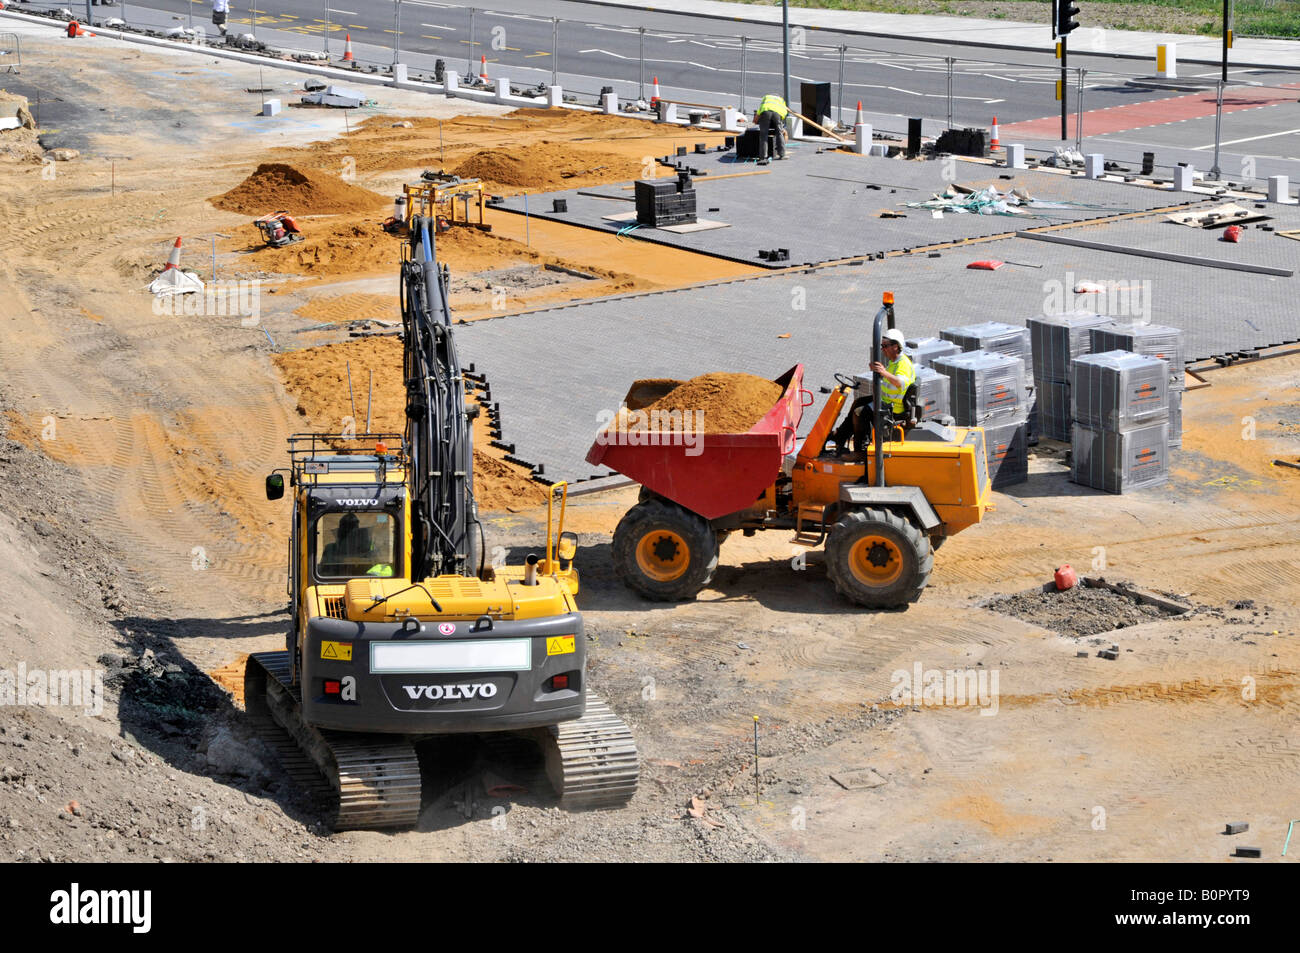 Construction site with dumper truck and excavator machines in use on car park block laying project Stock Photo